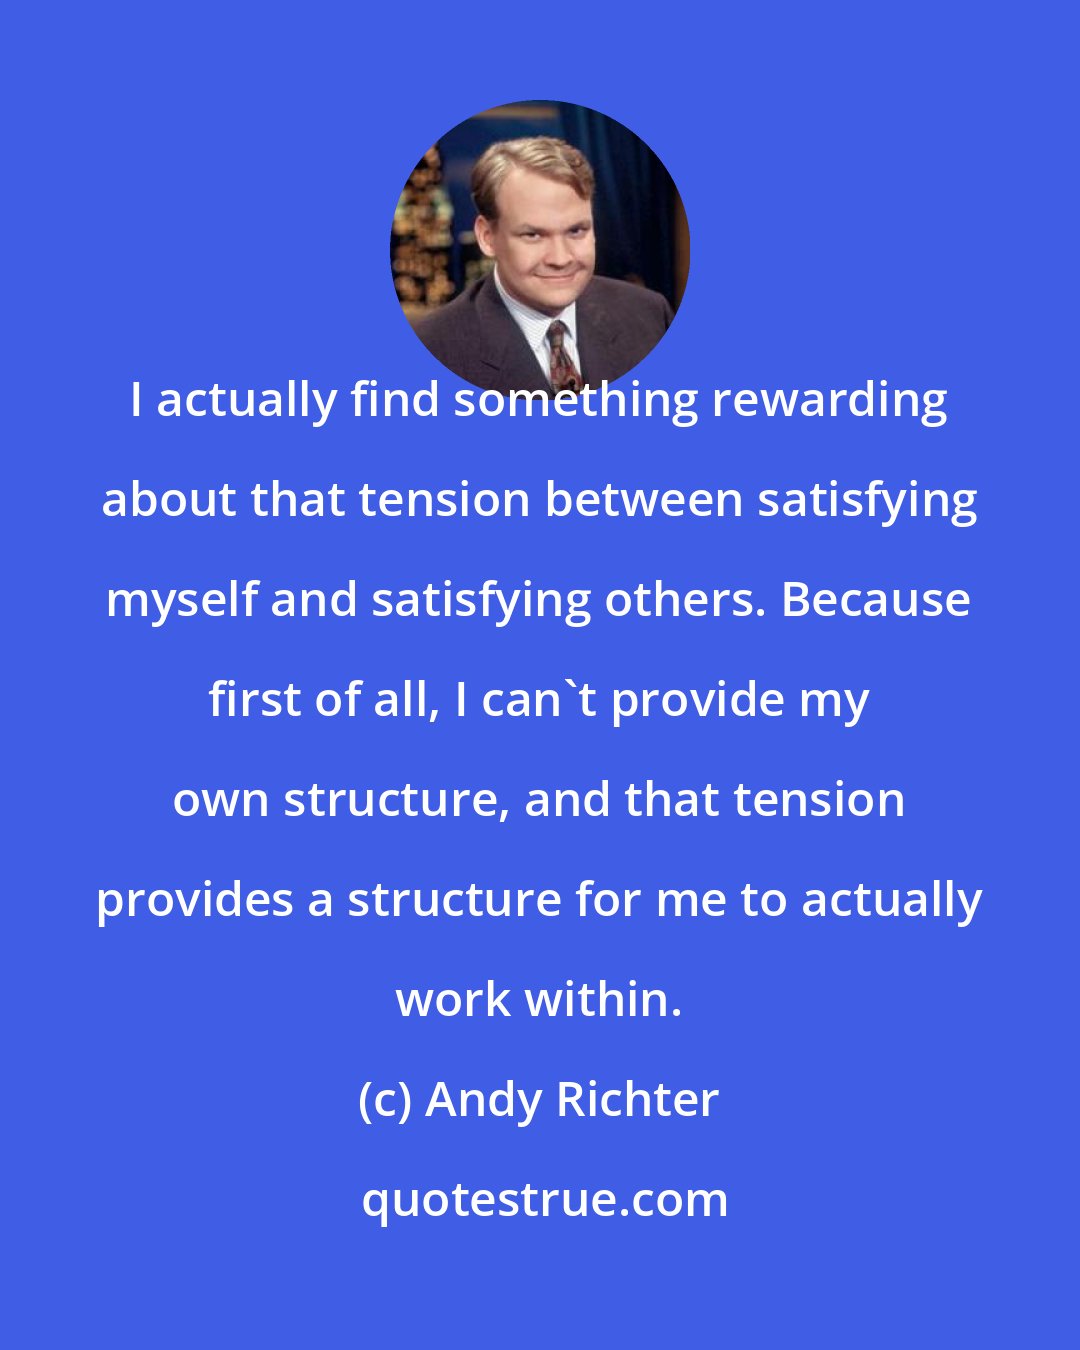 Andy Richter: I actually find something rewarding about that tension between satisfying myself and satisfying others. Because first of all, I can't provide my own structure, and that tension provides a structure for me to actually work within.